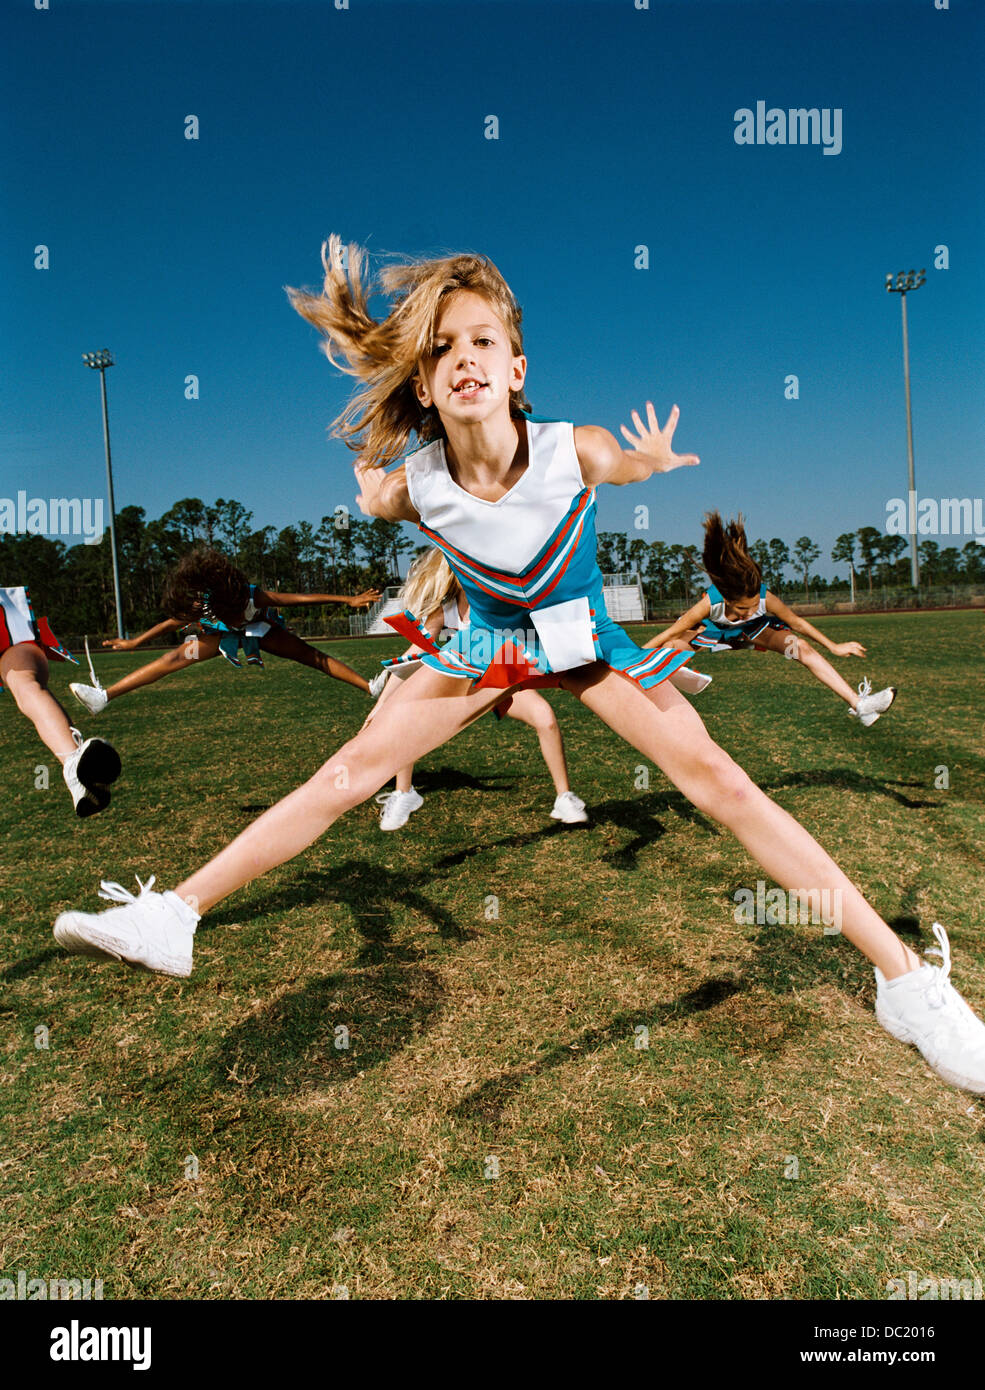 Cheerleaders performing dance routine on sports field Stock Photo